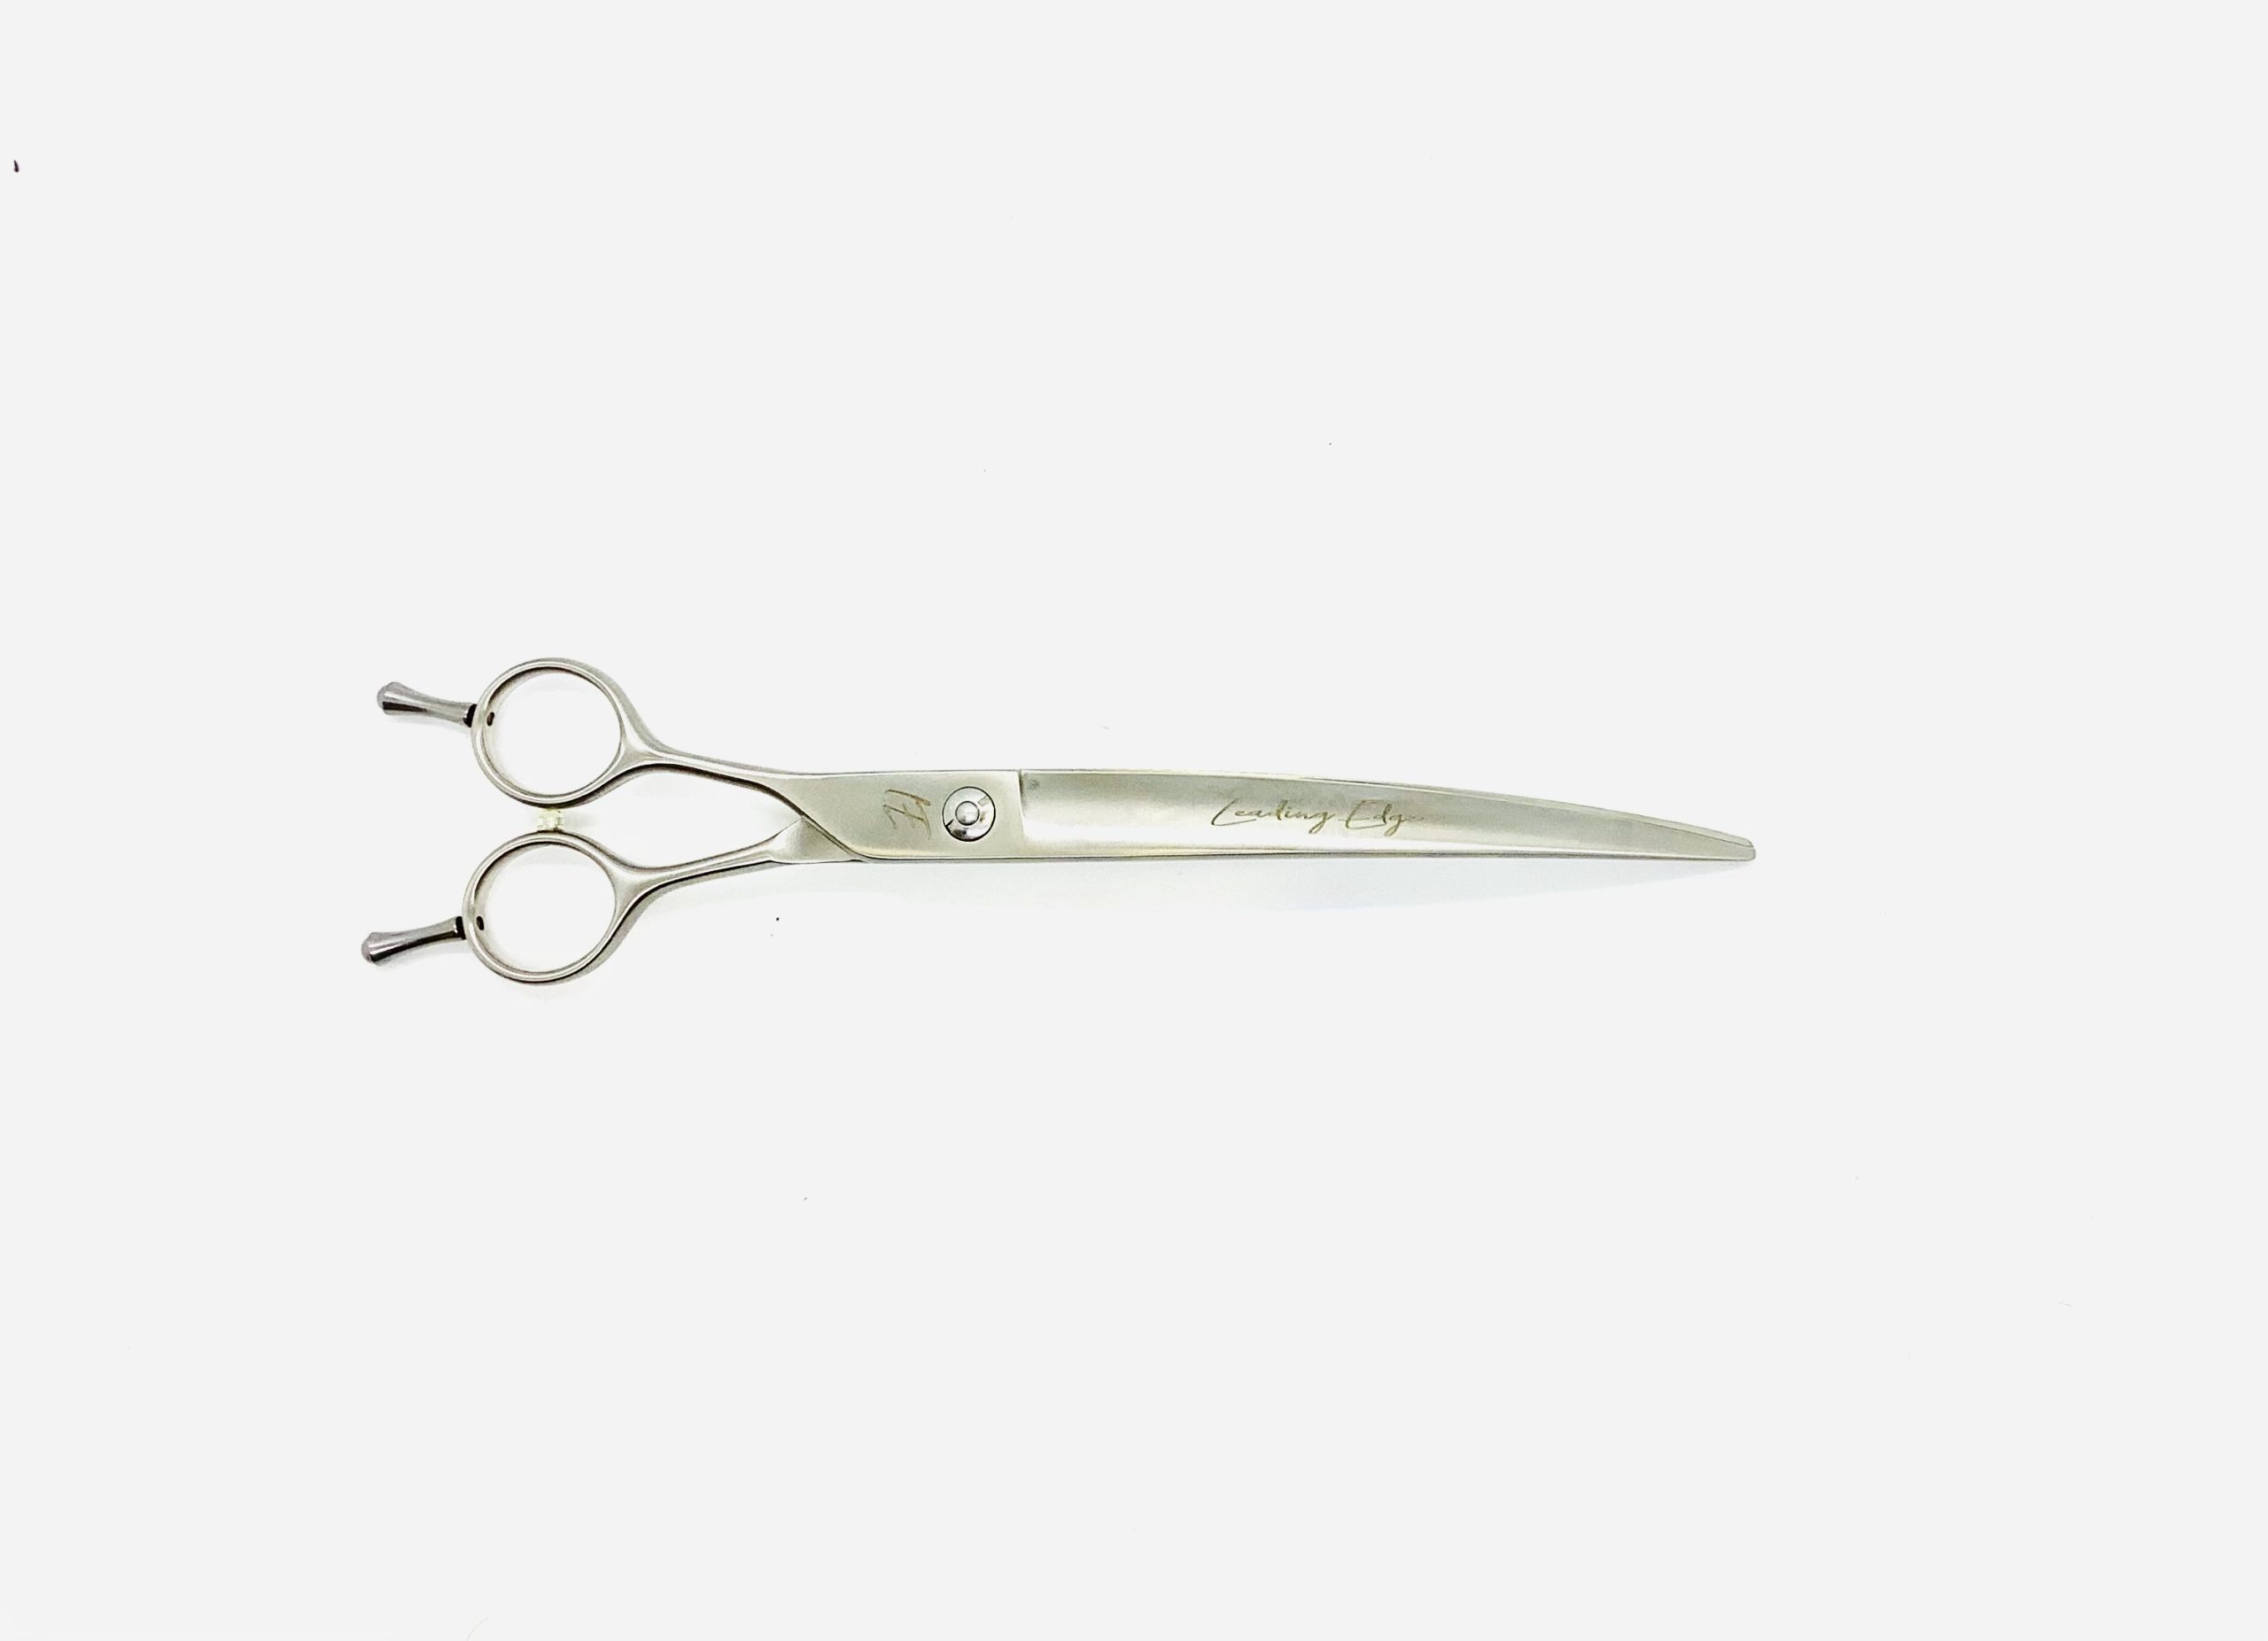 Allex Left Handed Scissors Adult Large 8 Inch, All Purpose Heavy